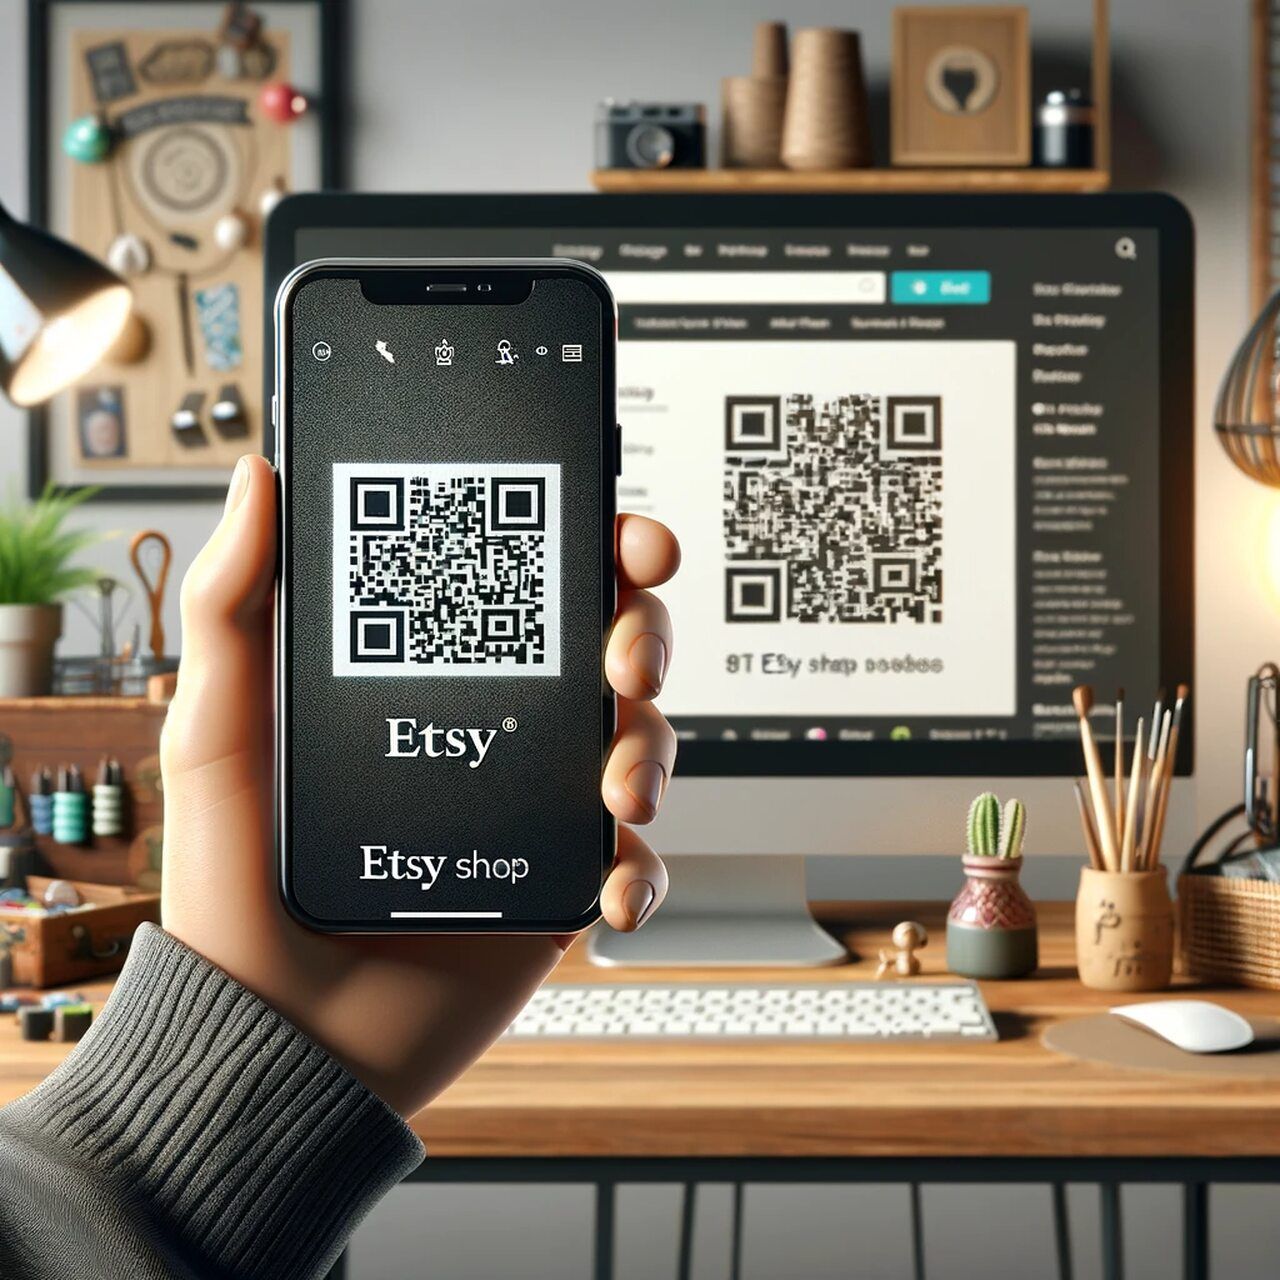 smartphone held in hand, displaying an Etsy QR code on its screen